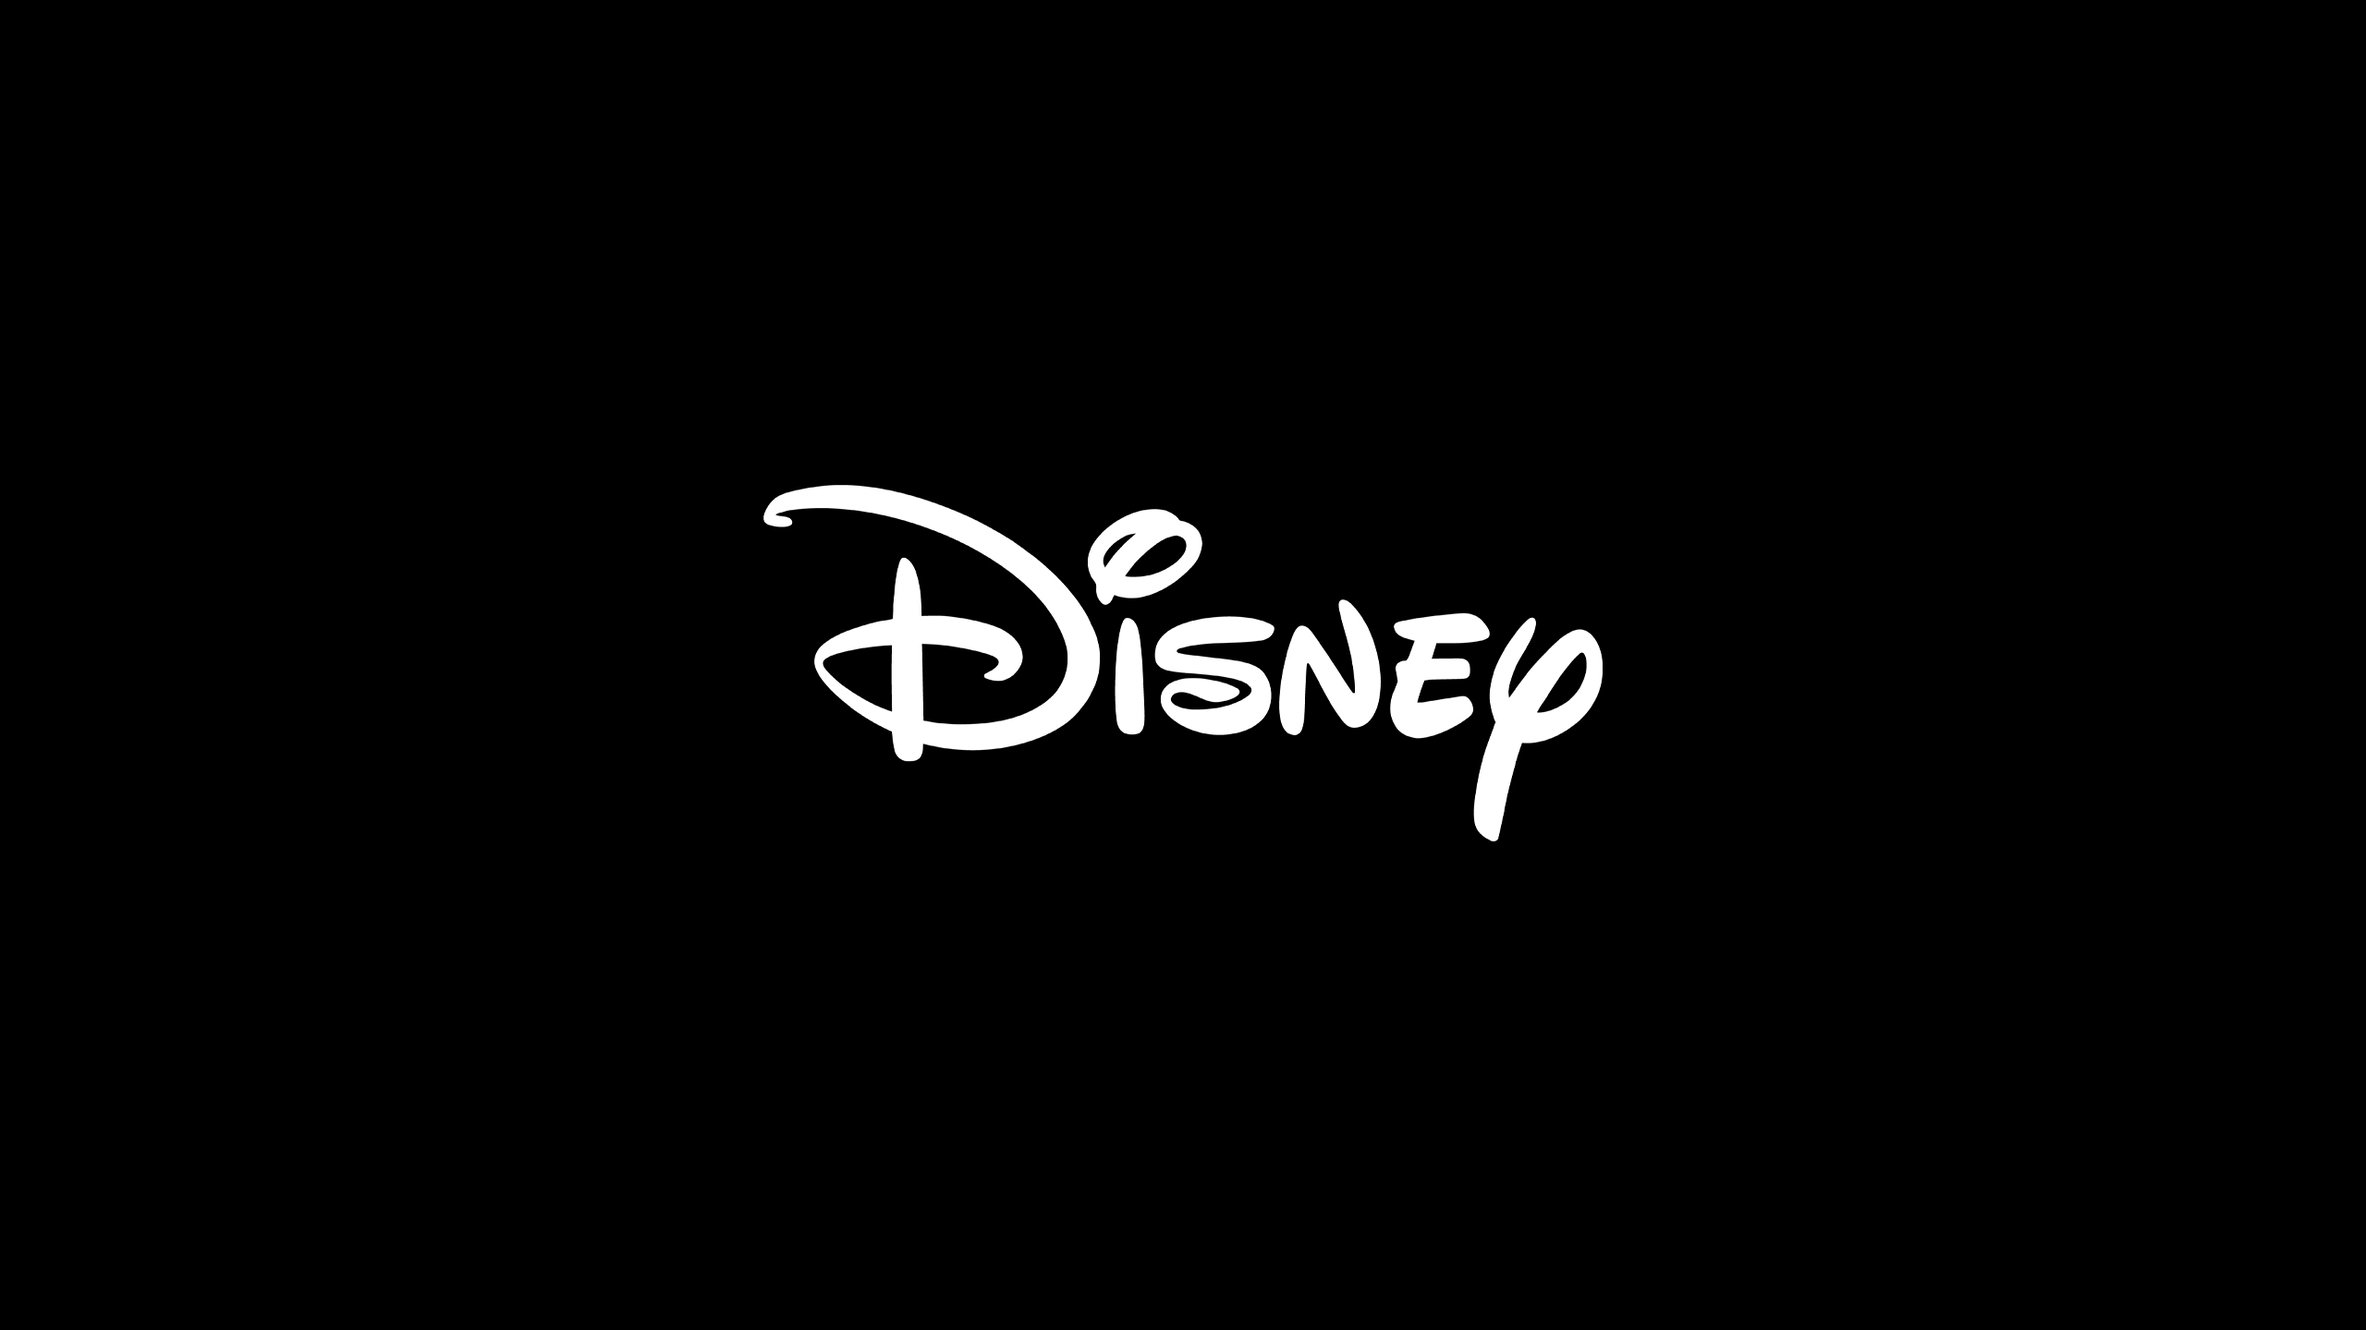 Casting for the Disney feature film Jungle Cruise!